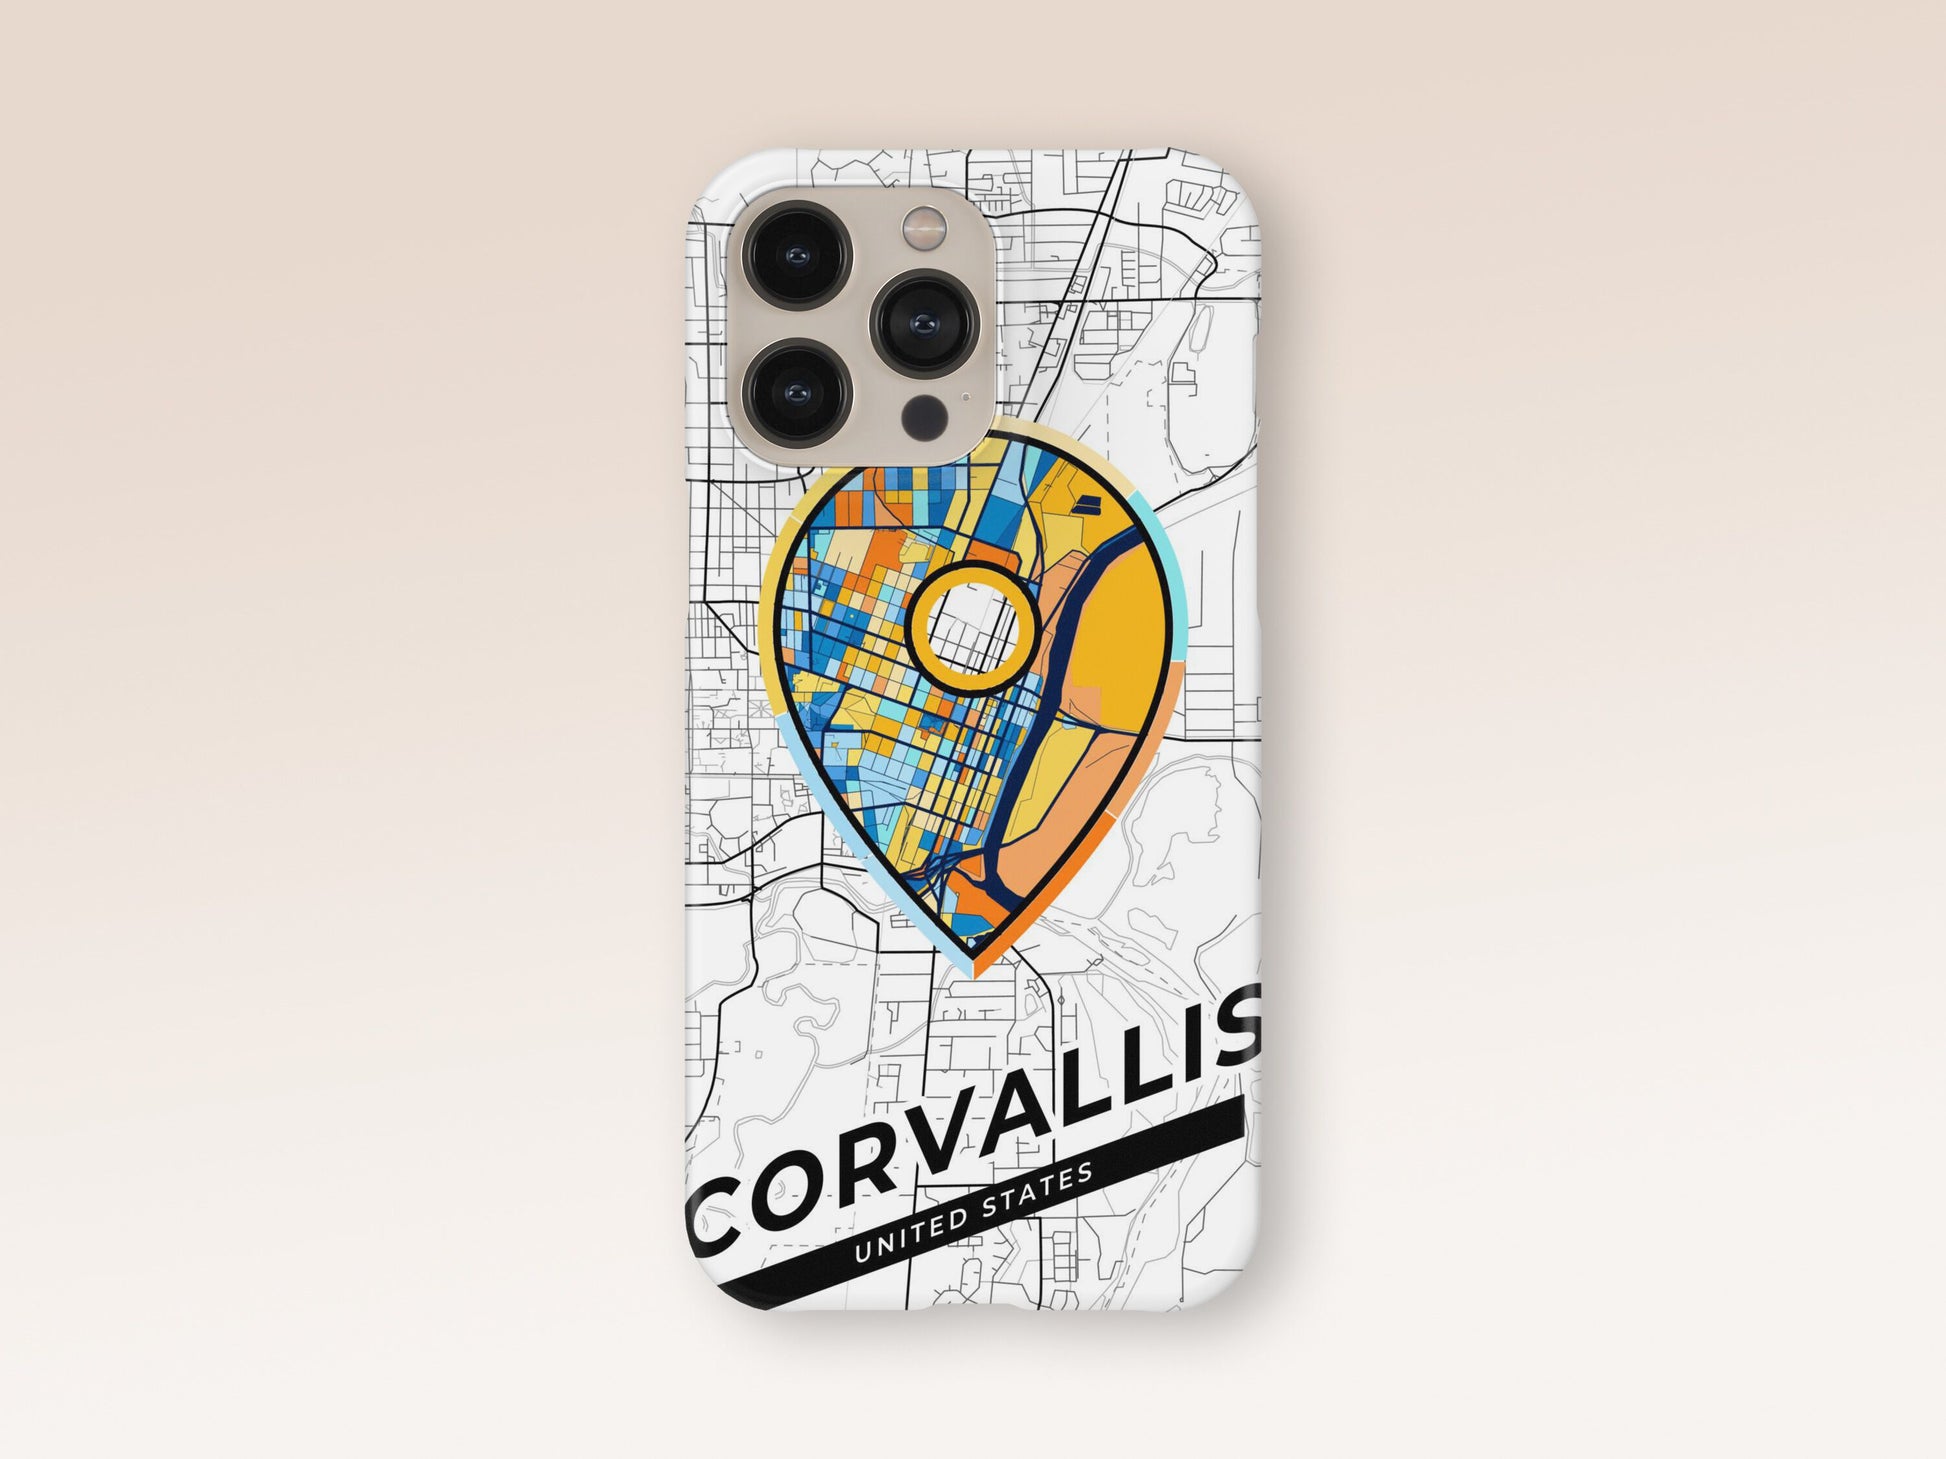 Corvallis Oregon slim phone case with colorful icon. Birthday, wedding or housewarming gift. Couple match cases. 1